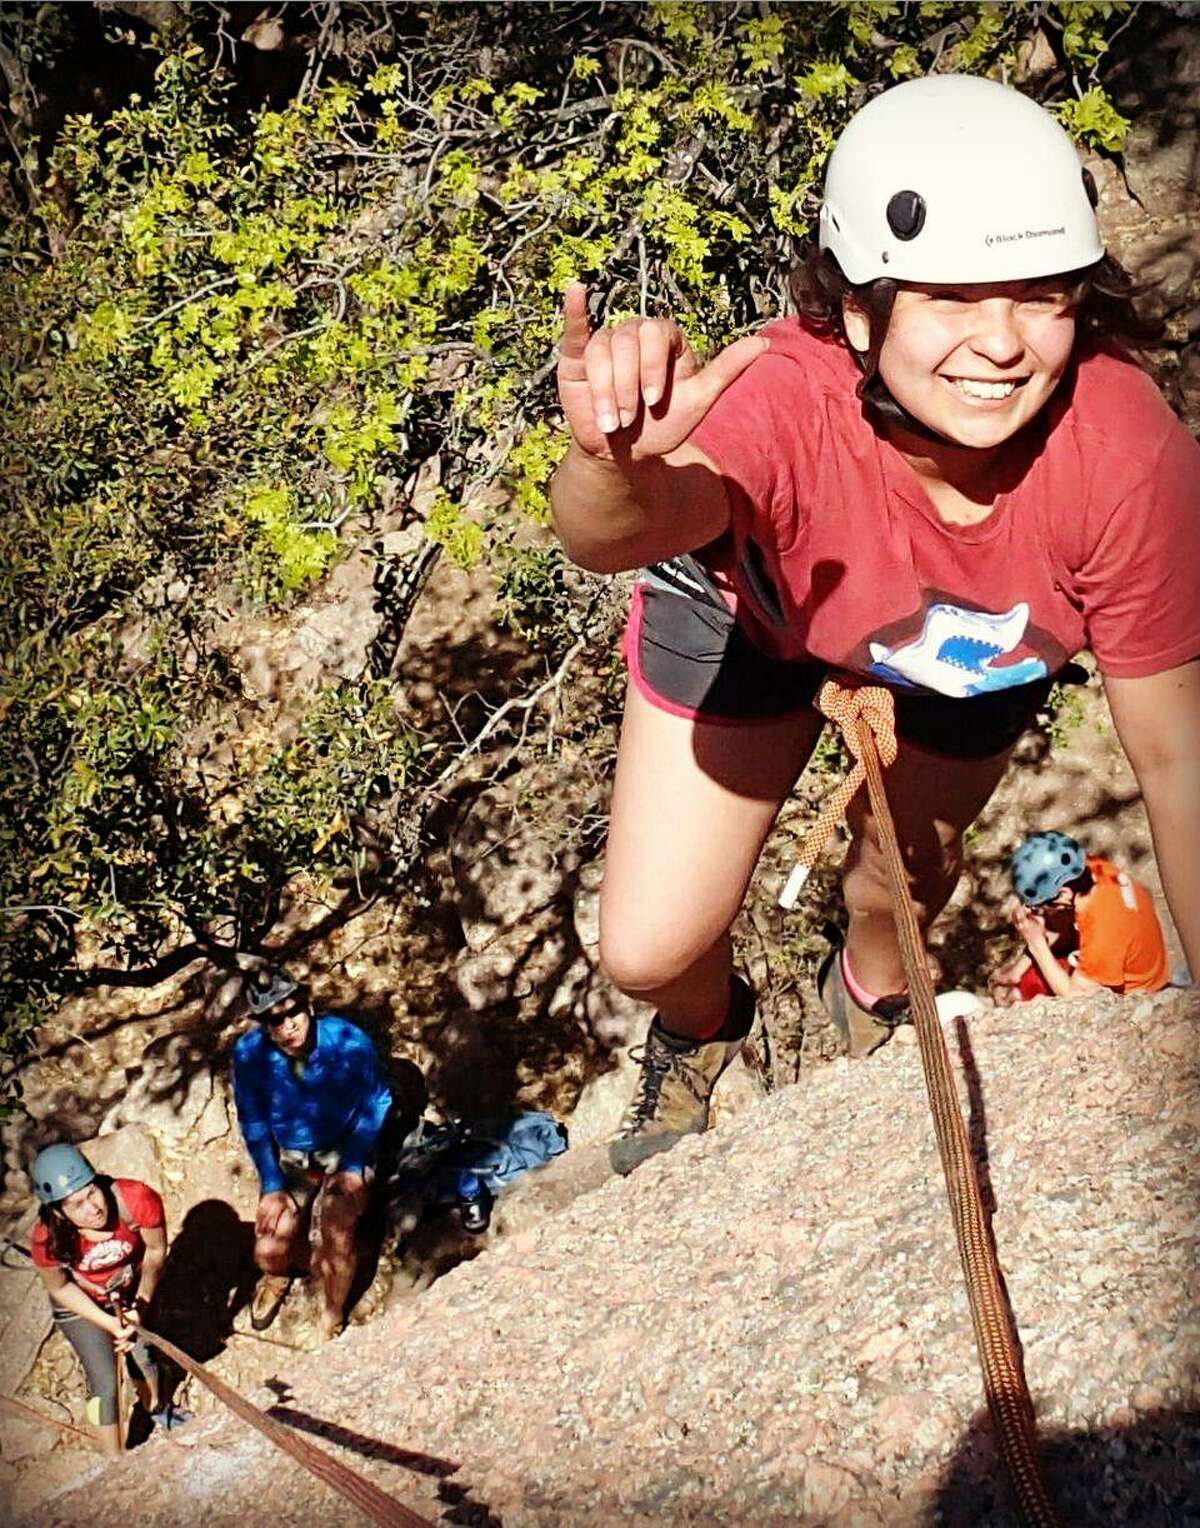 Outdoor Pursuits students and staff lead such trips as rock climbing for their peers and learn leadership, teaching and risk management skills that help them in all aspects of their lives.